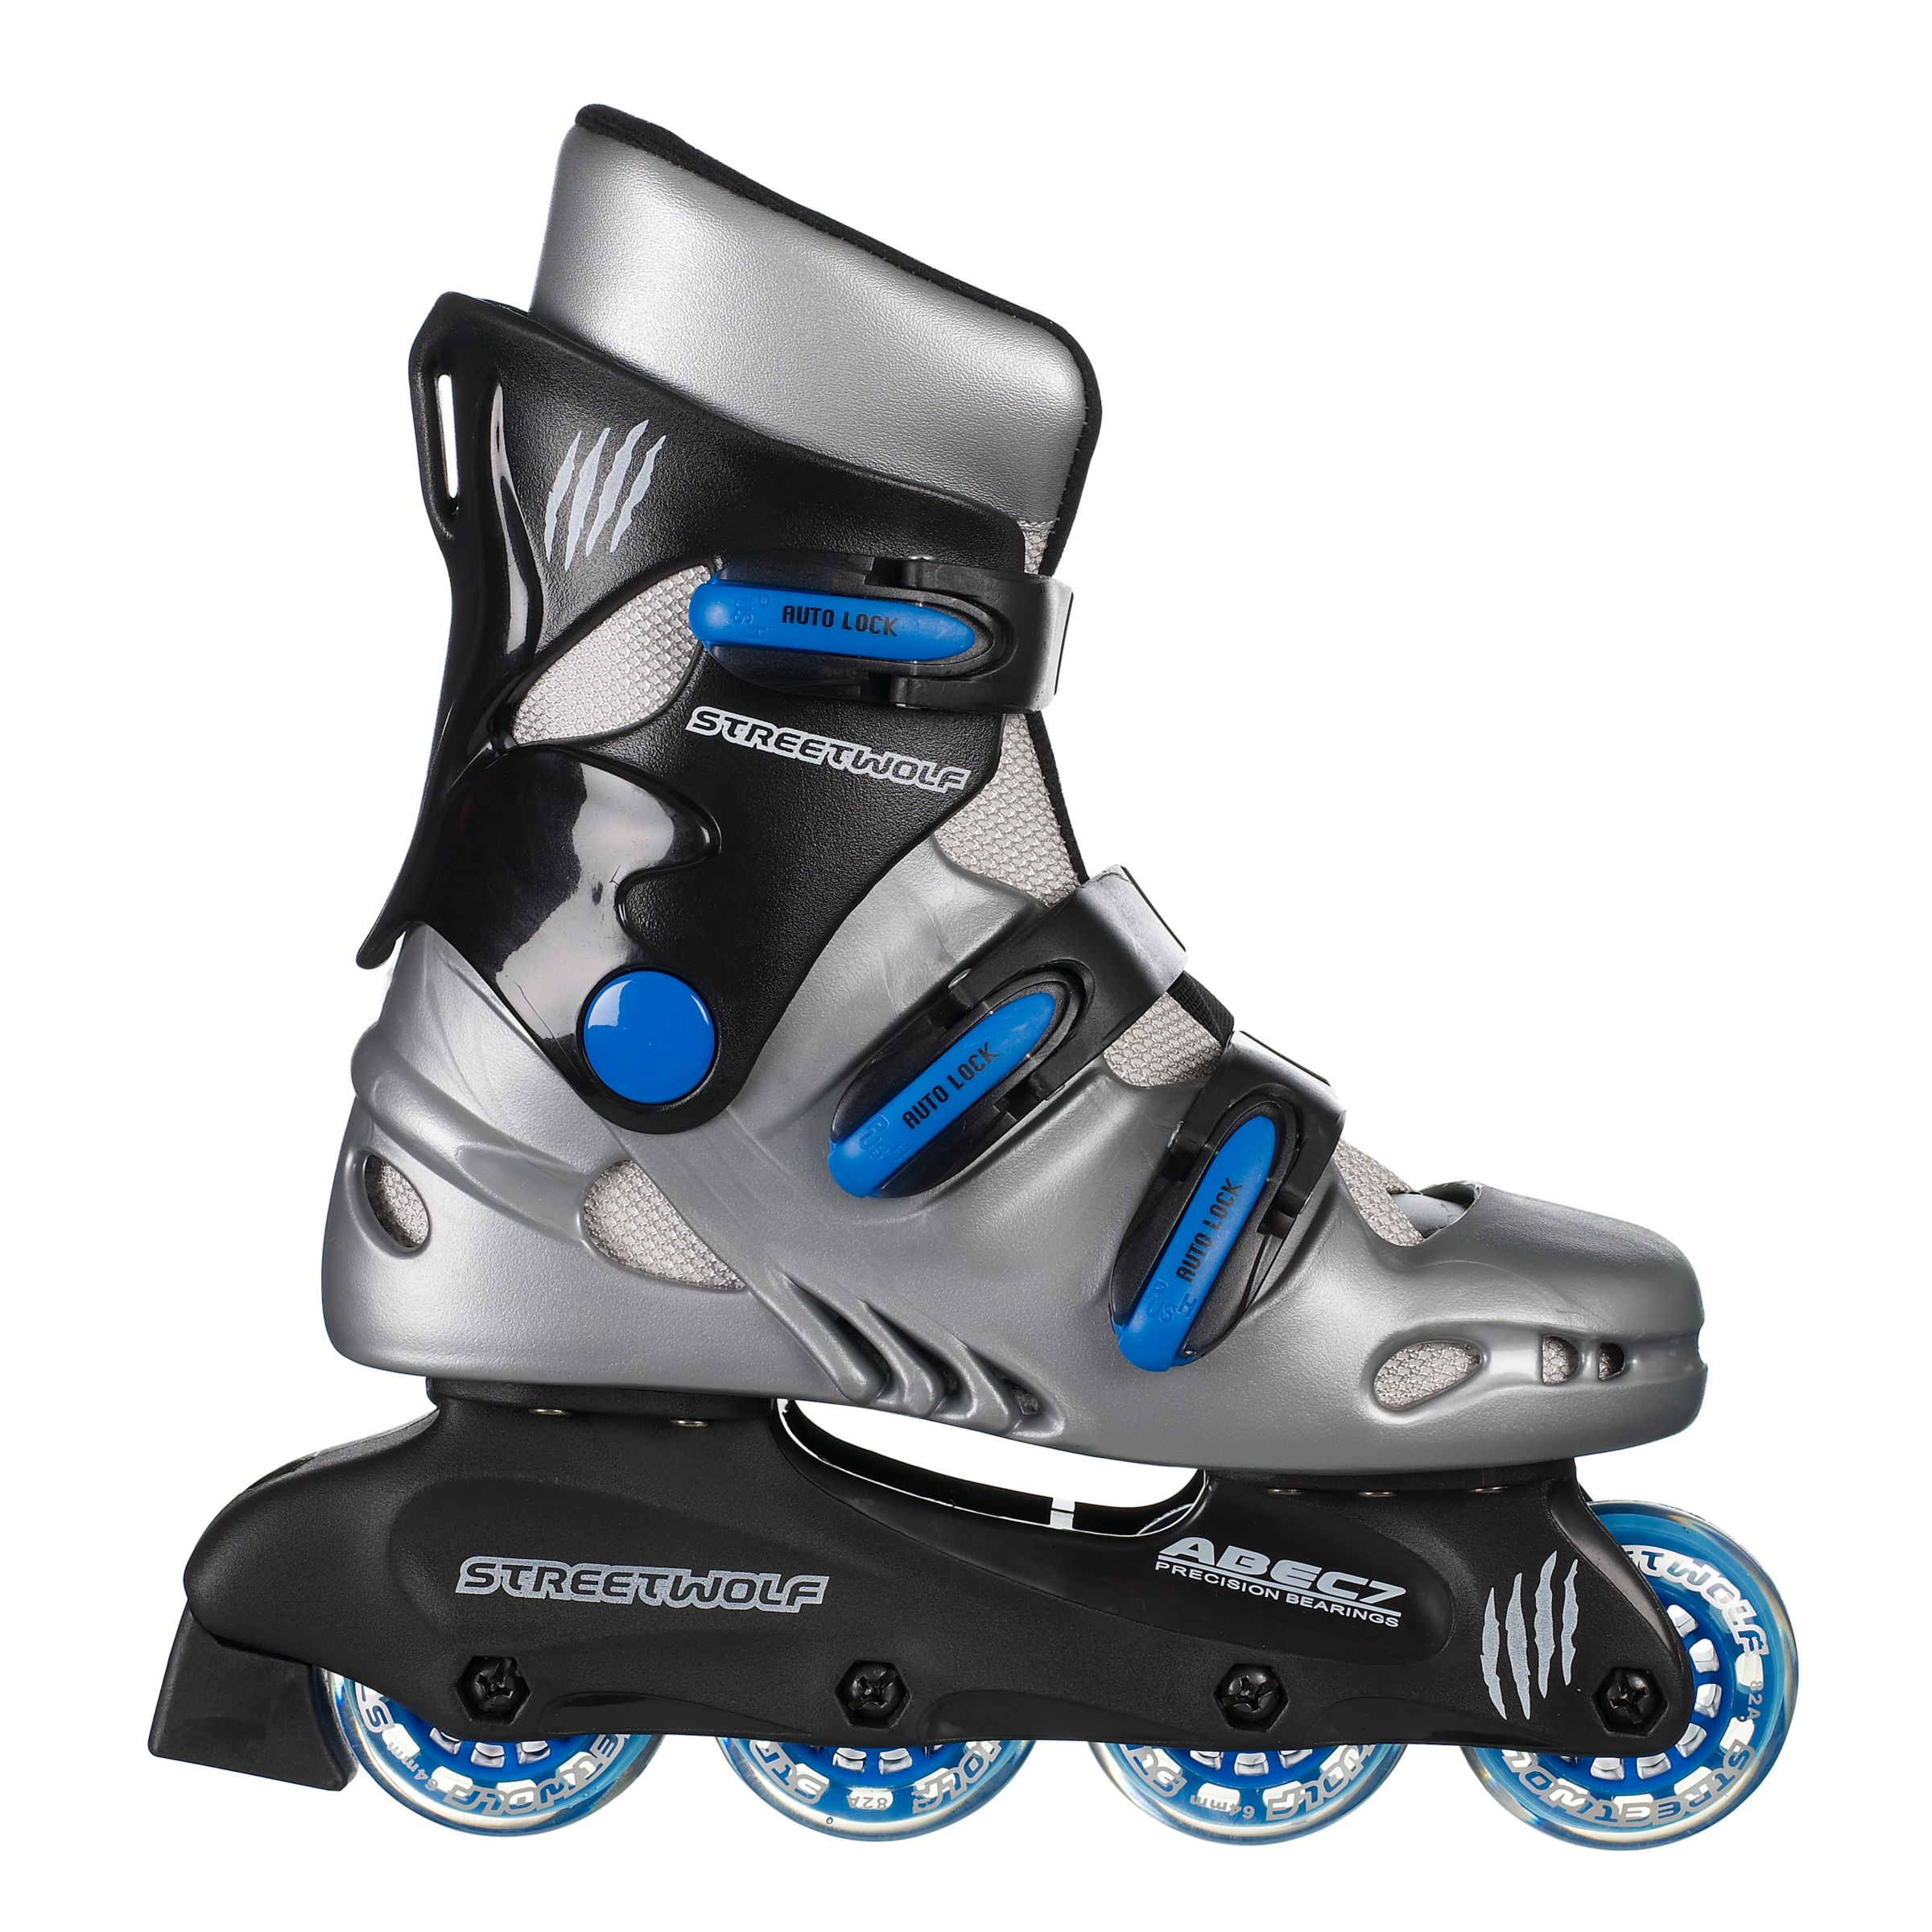 Unbranded Streetwolf Inline Skates, Blue, Size 1